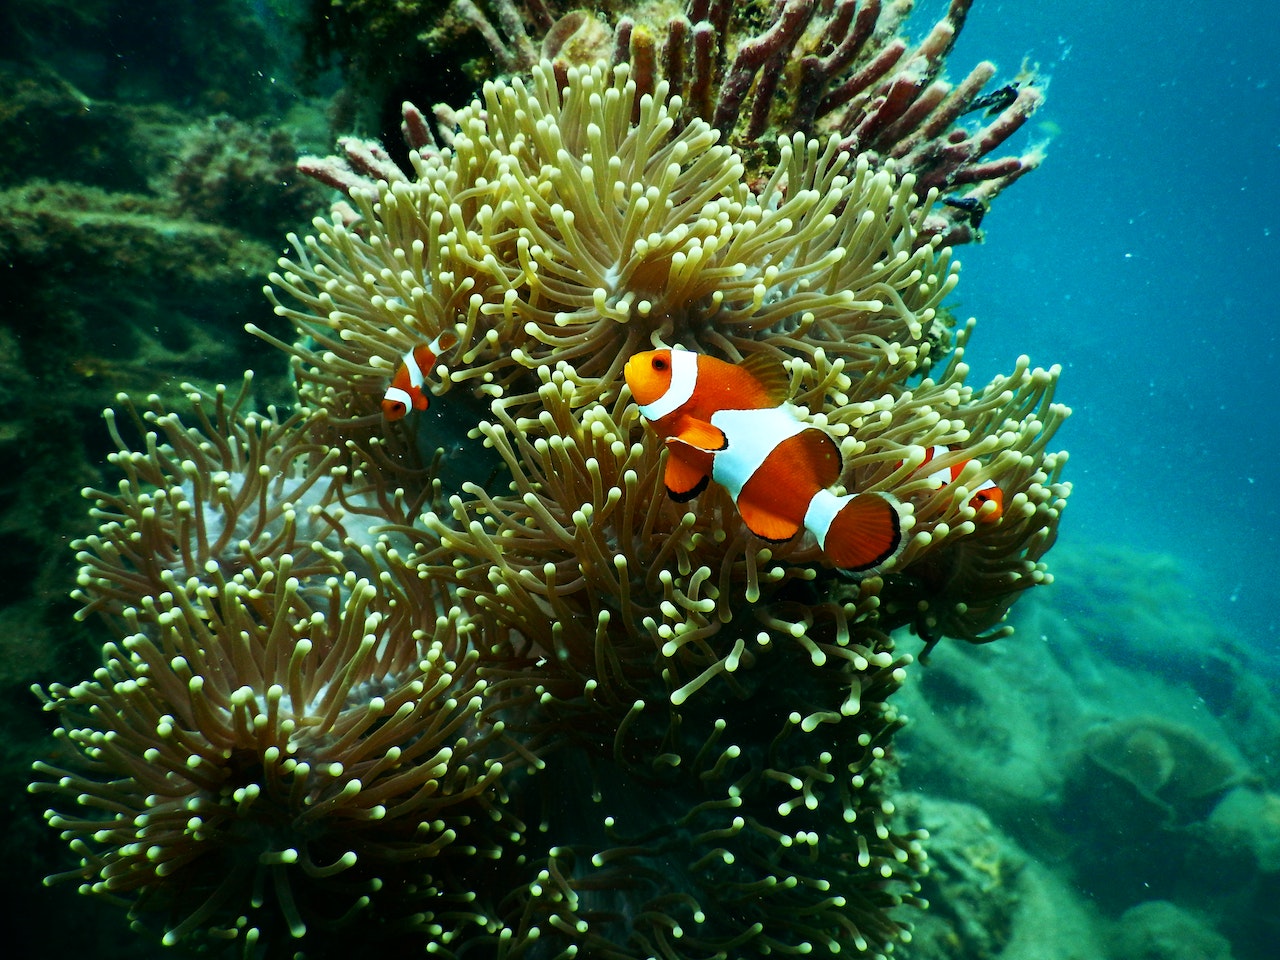 20 Startling Facts About the Great Barrier Reef